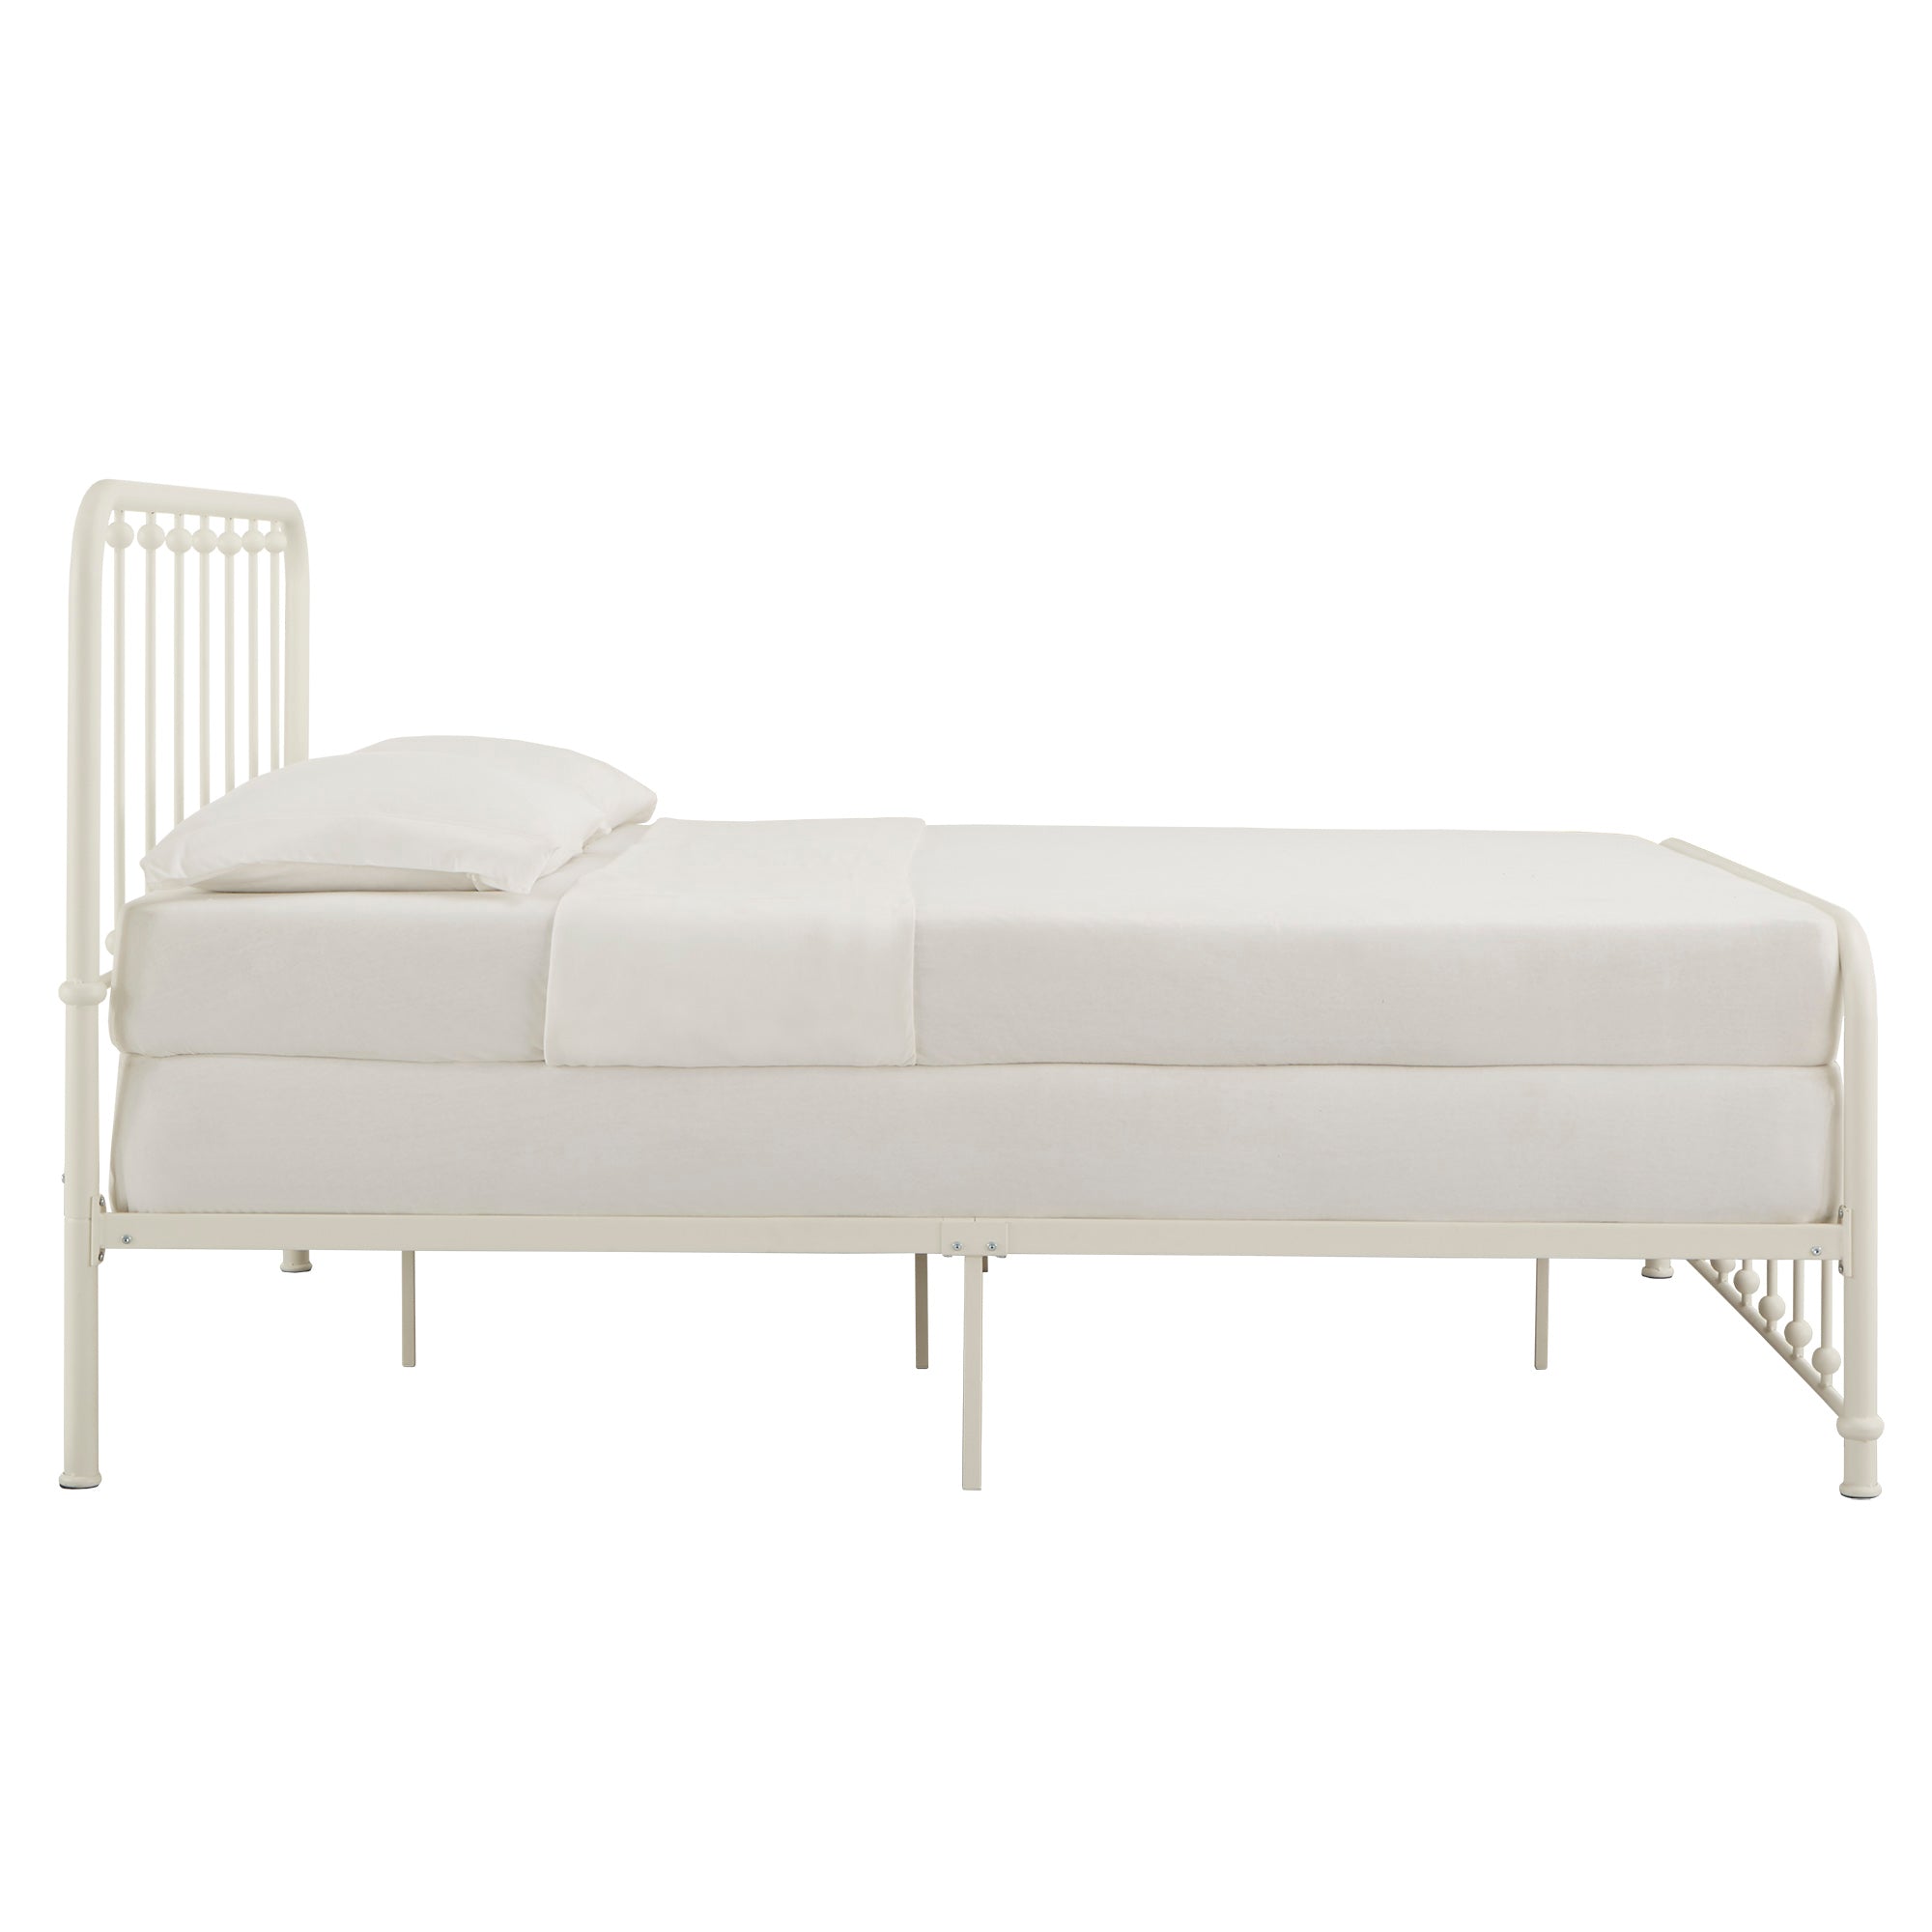 Beaded Spindle Metal Platform Bed - White, Queen Size (Queen Size)